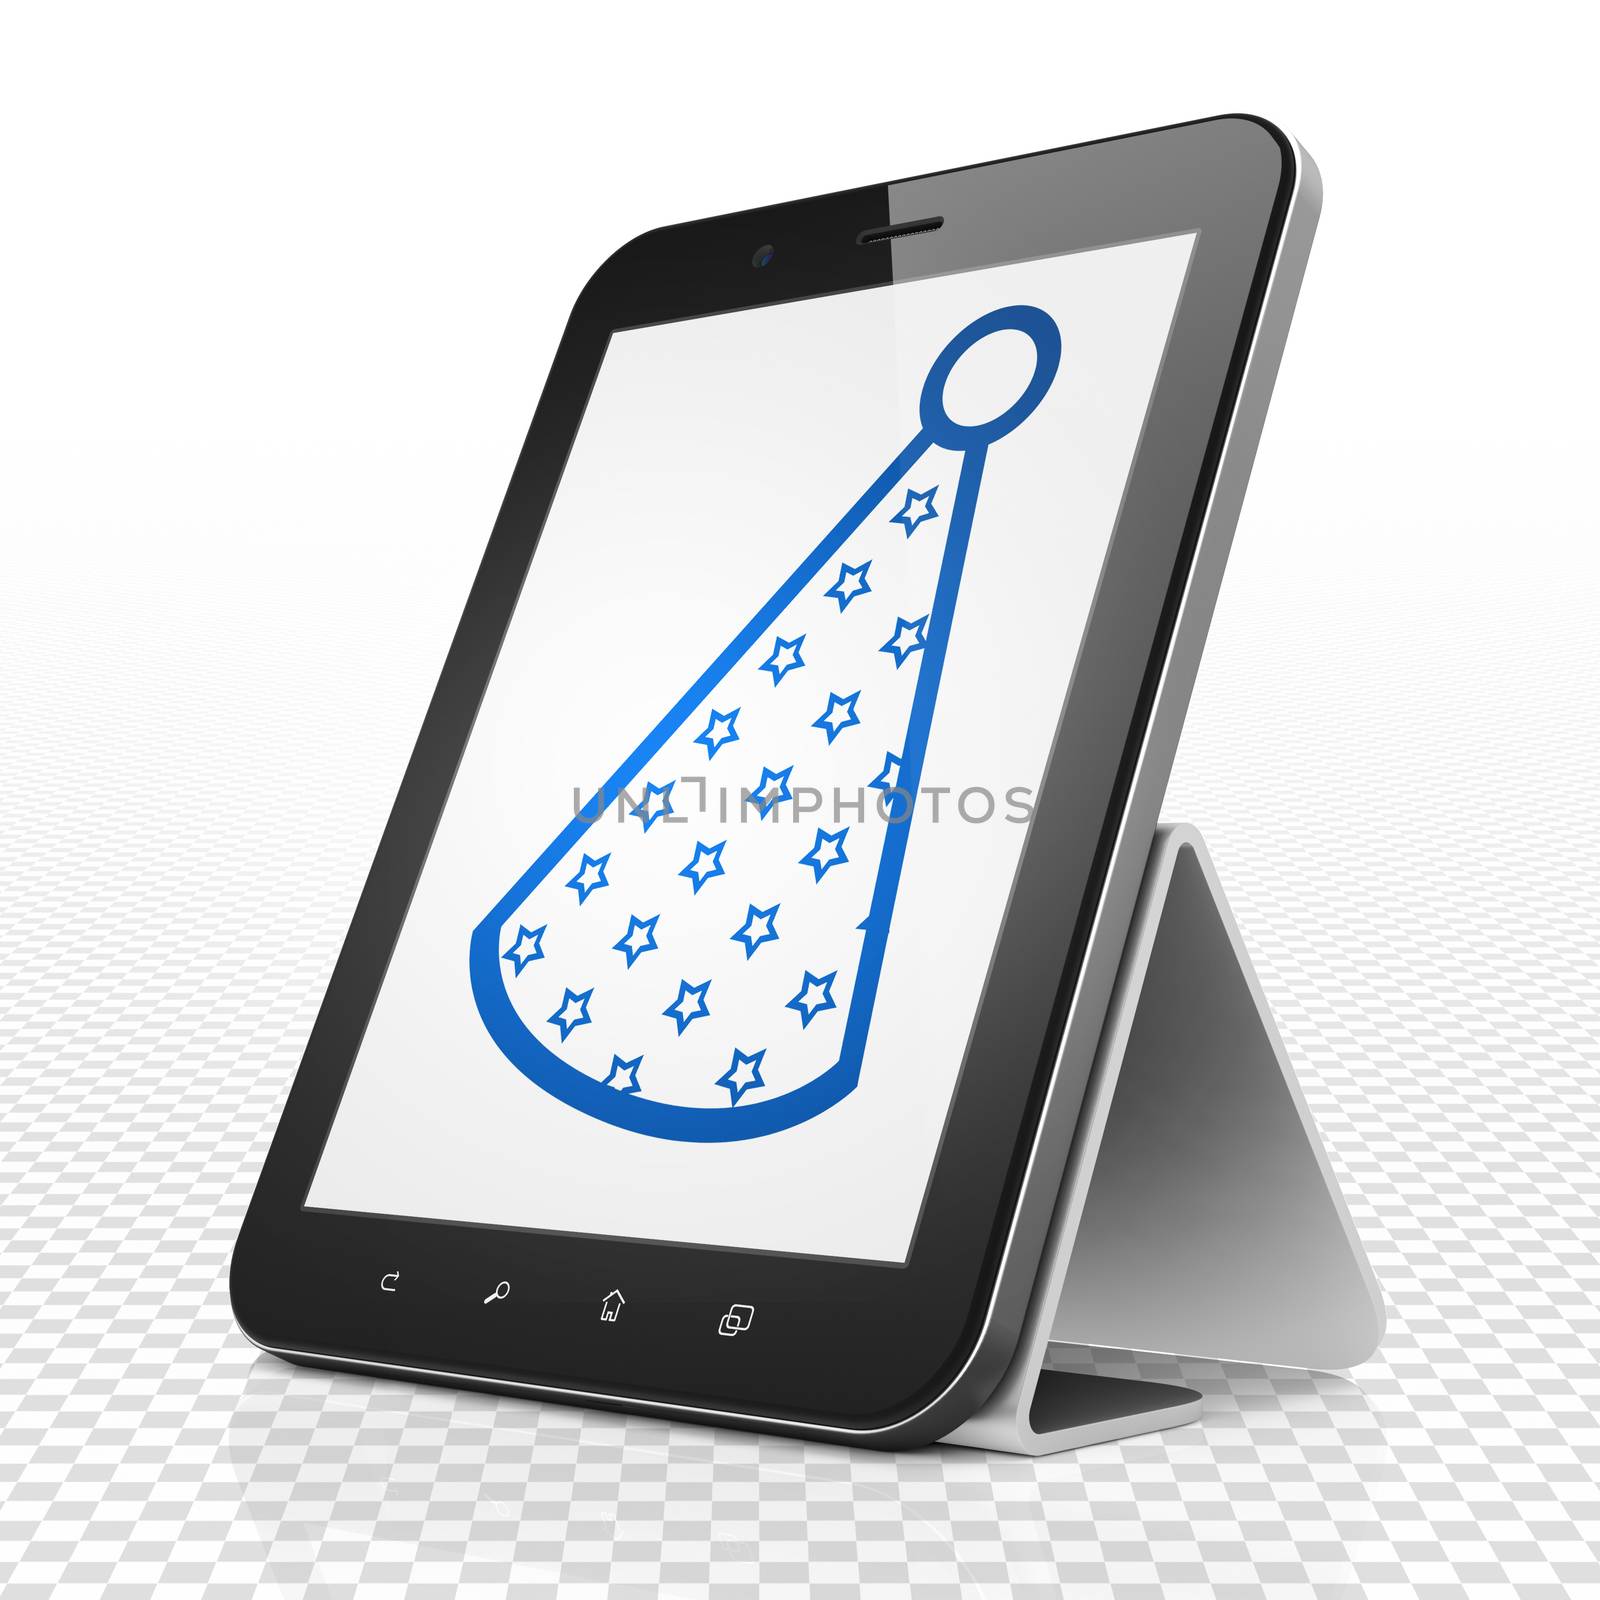 Entertainment, concept: Tablet Computer with blue Party Hat icon on display